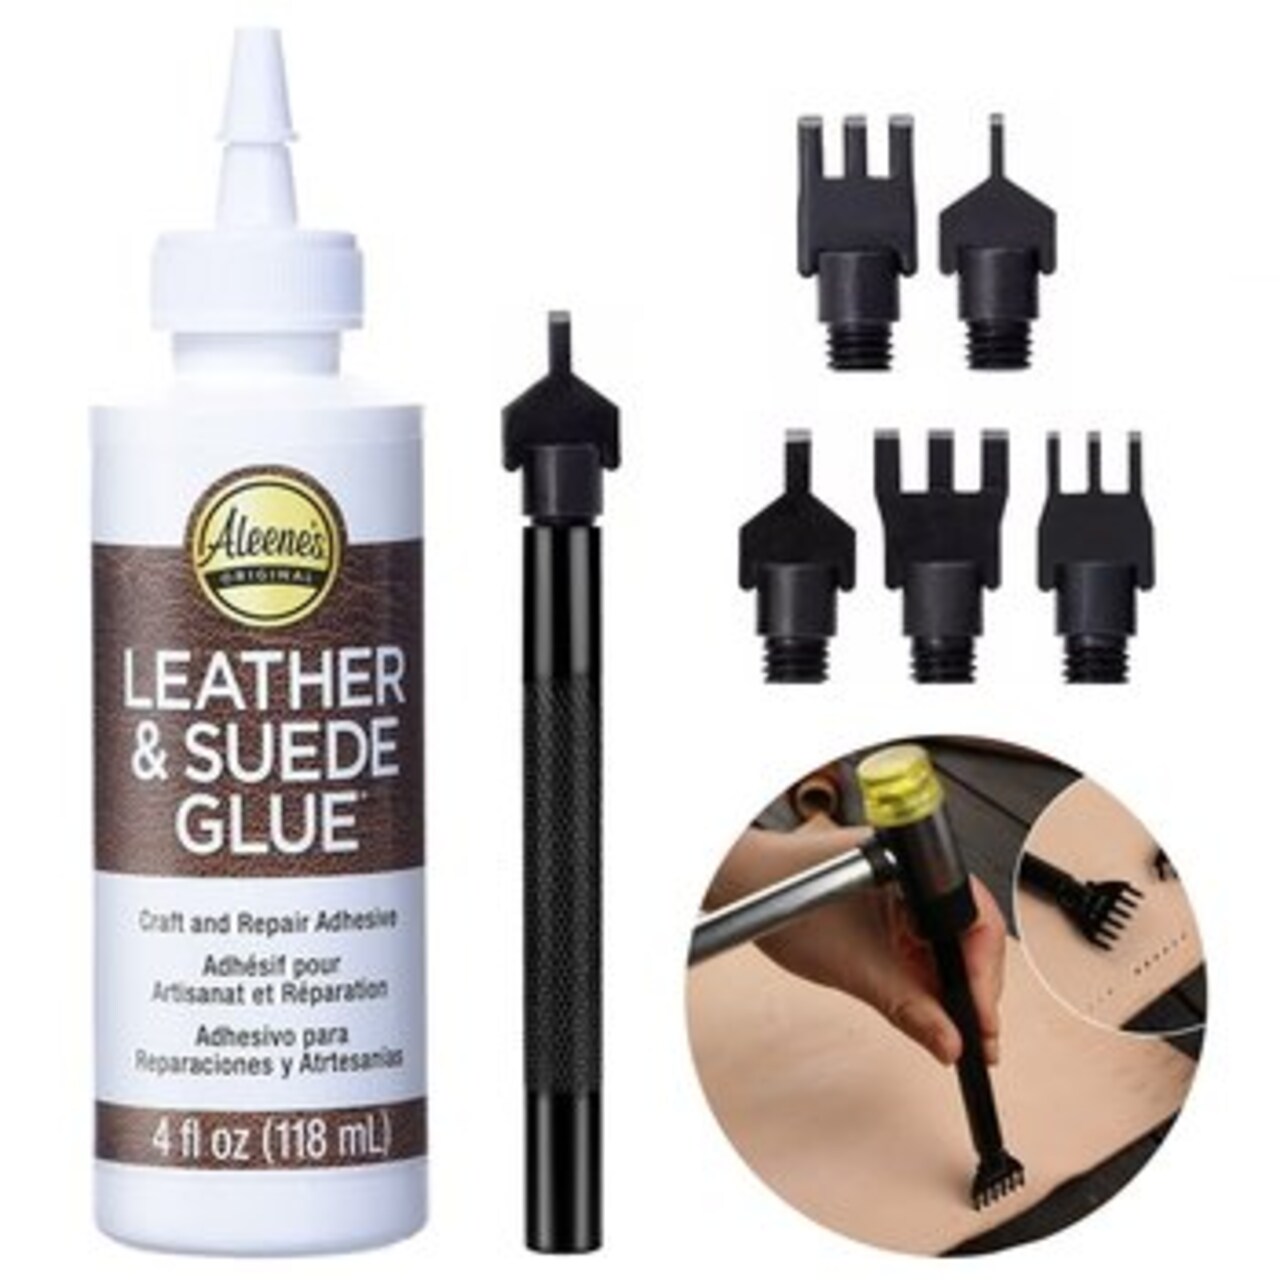 Leather Glue Adhesive - Aleenes Leather Fabric Glue for Patches,  Upholstery, Tears, Canvas, Clothing, Leather Punch Pen Tool with 6  Replacement Tips